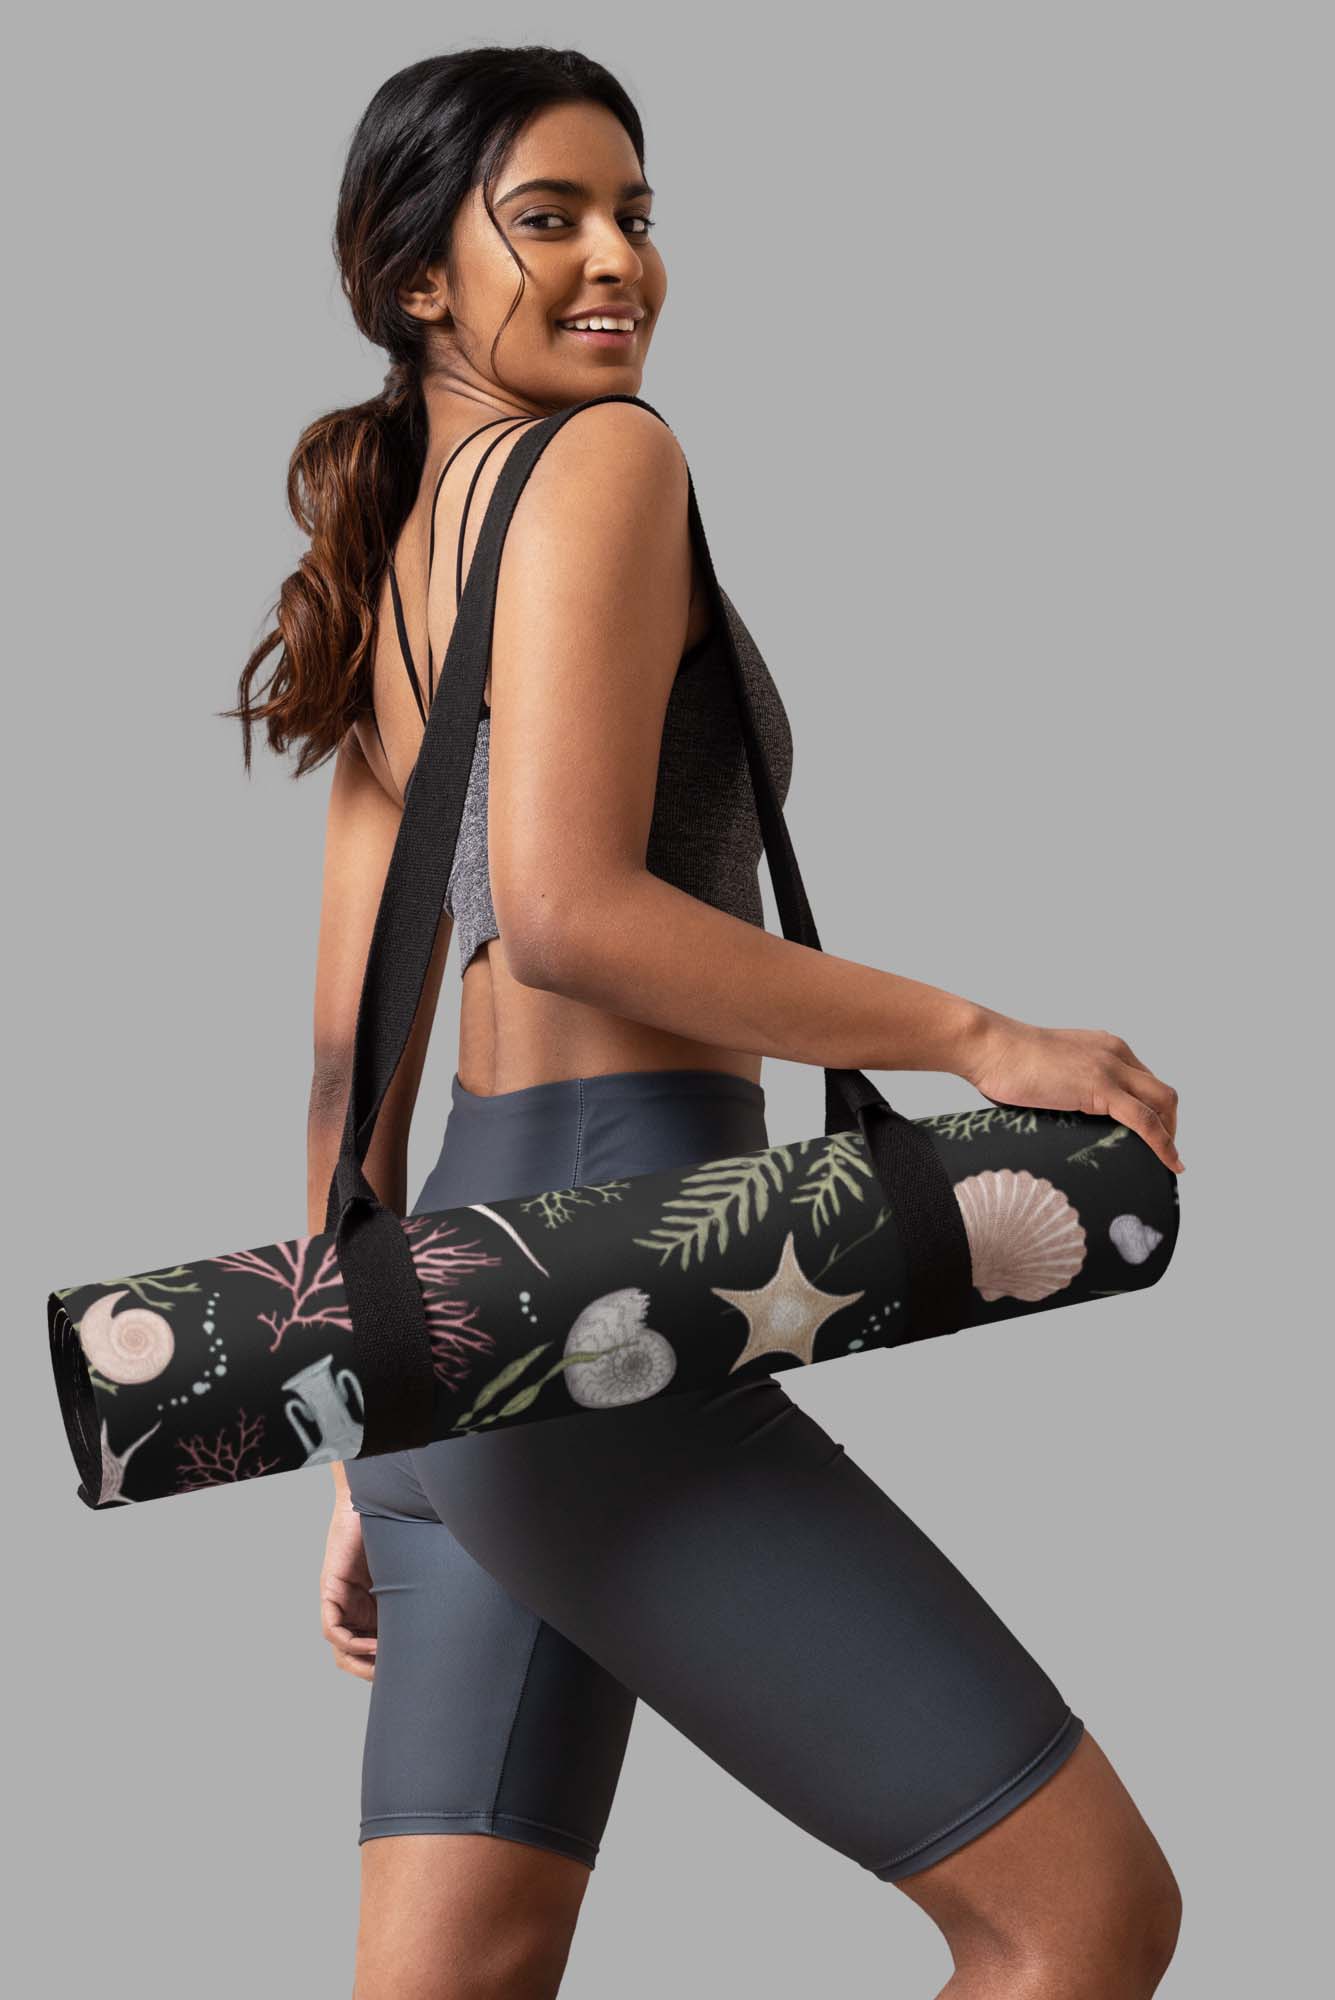 cosmic drifters sea witch yoga mat rolled